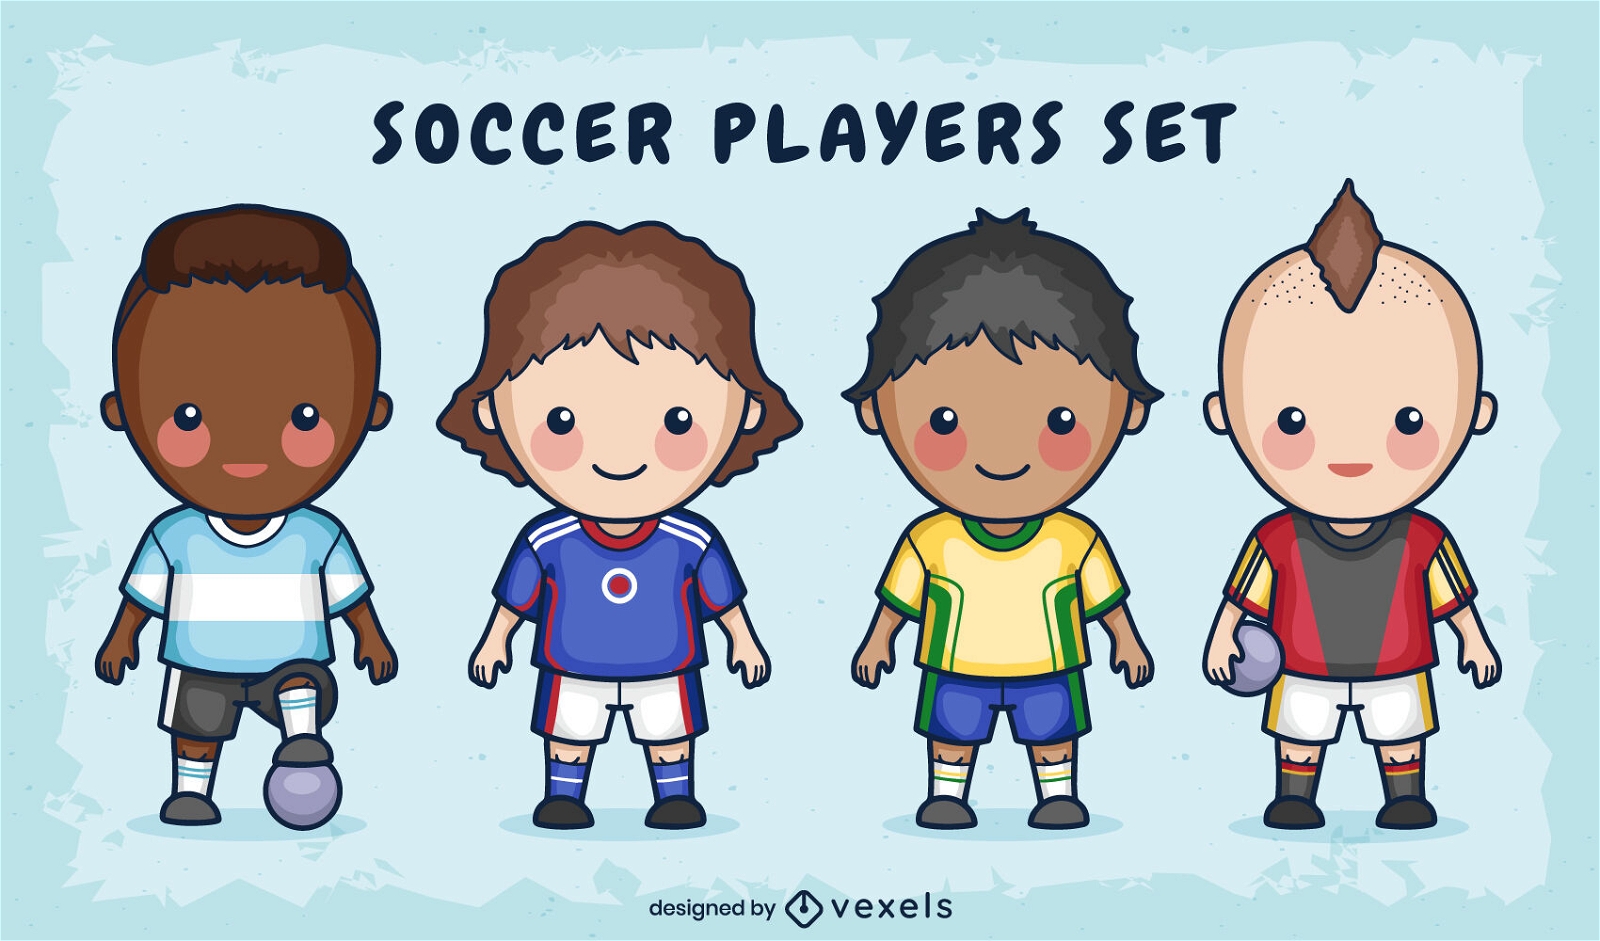 Soccer players from the world set